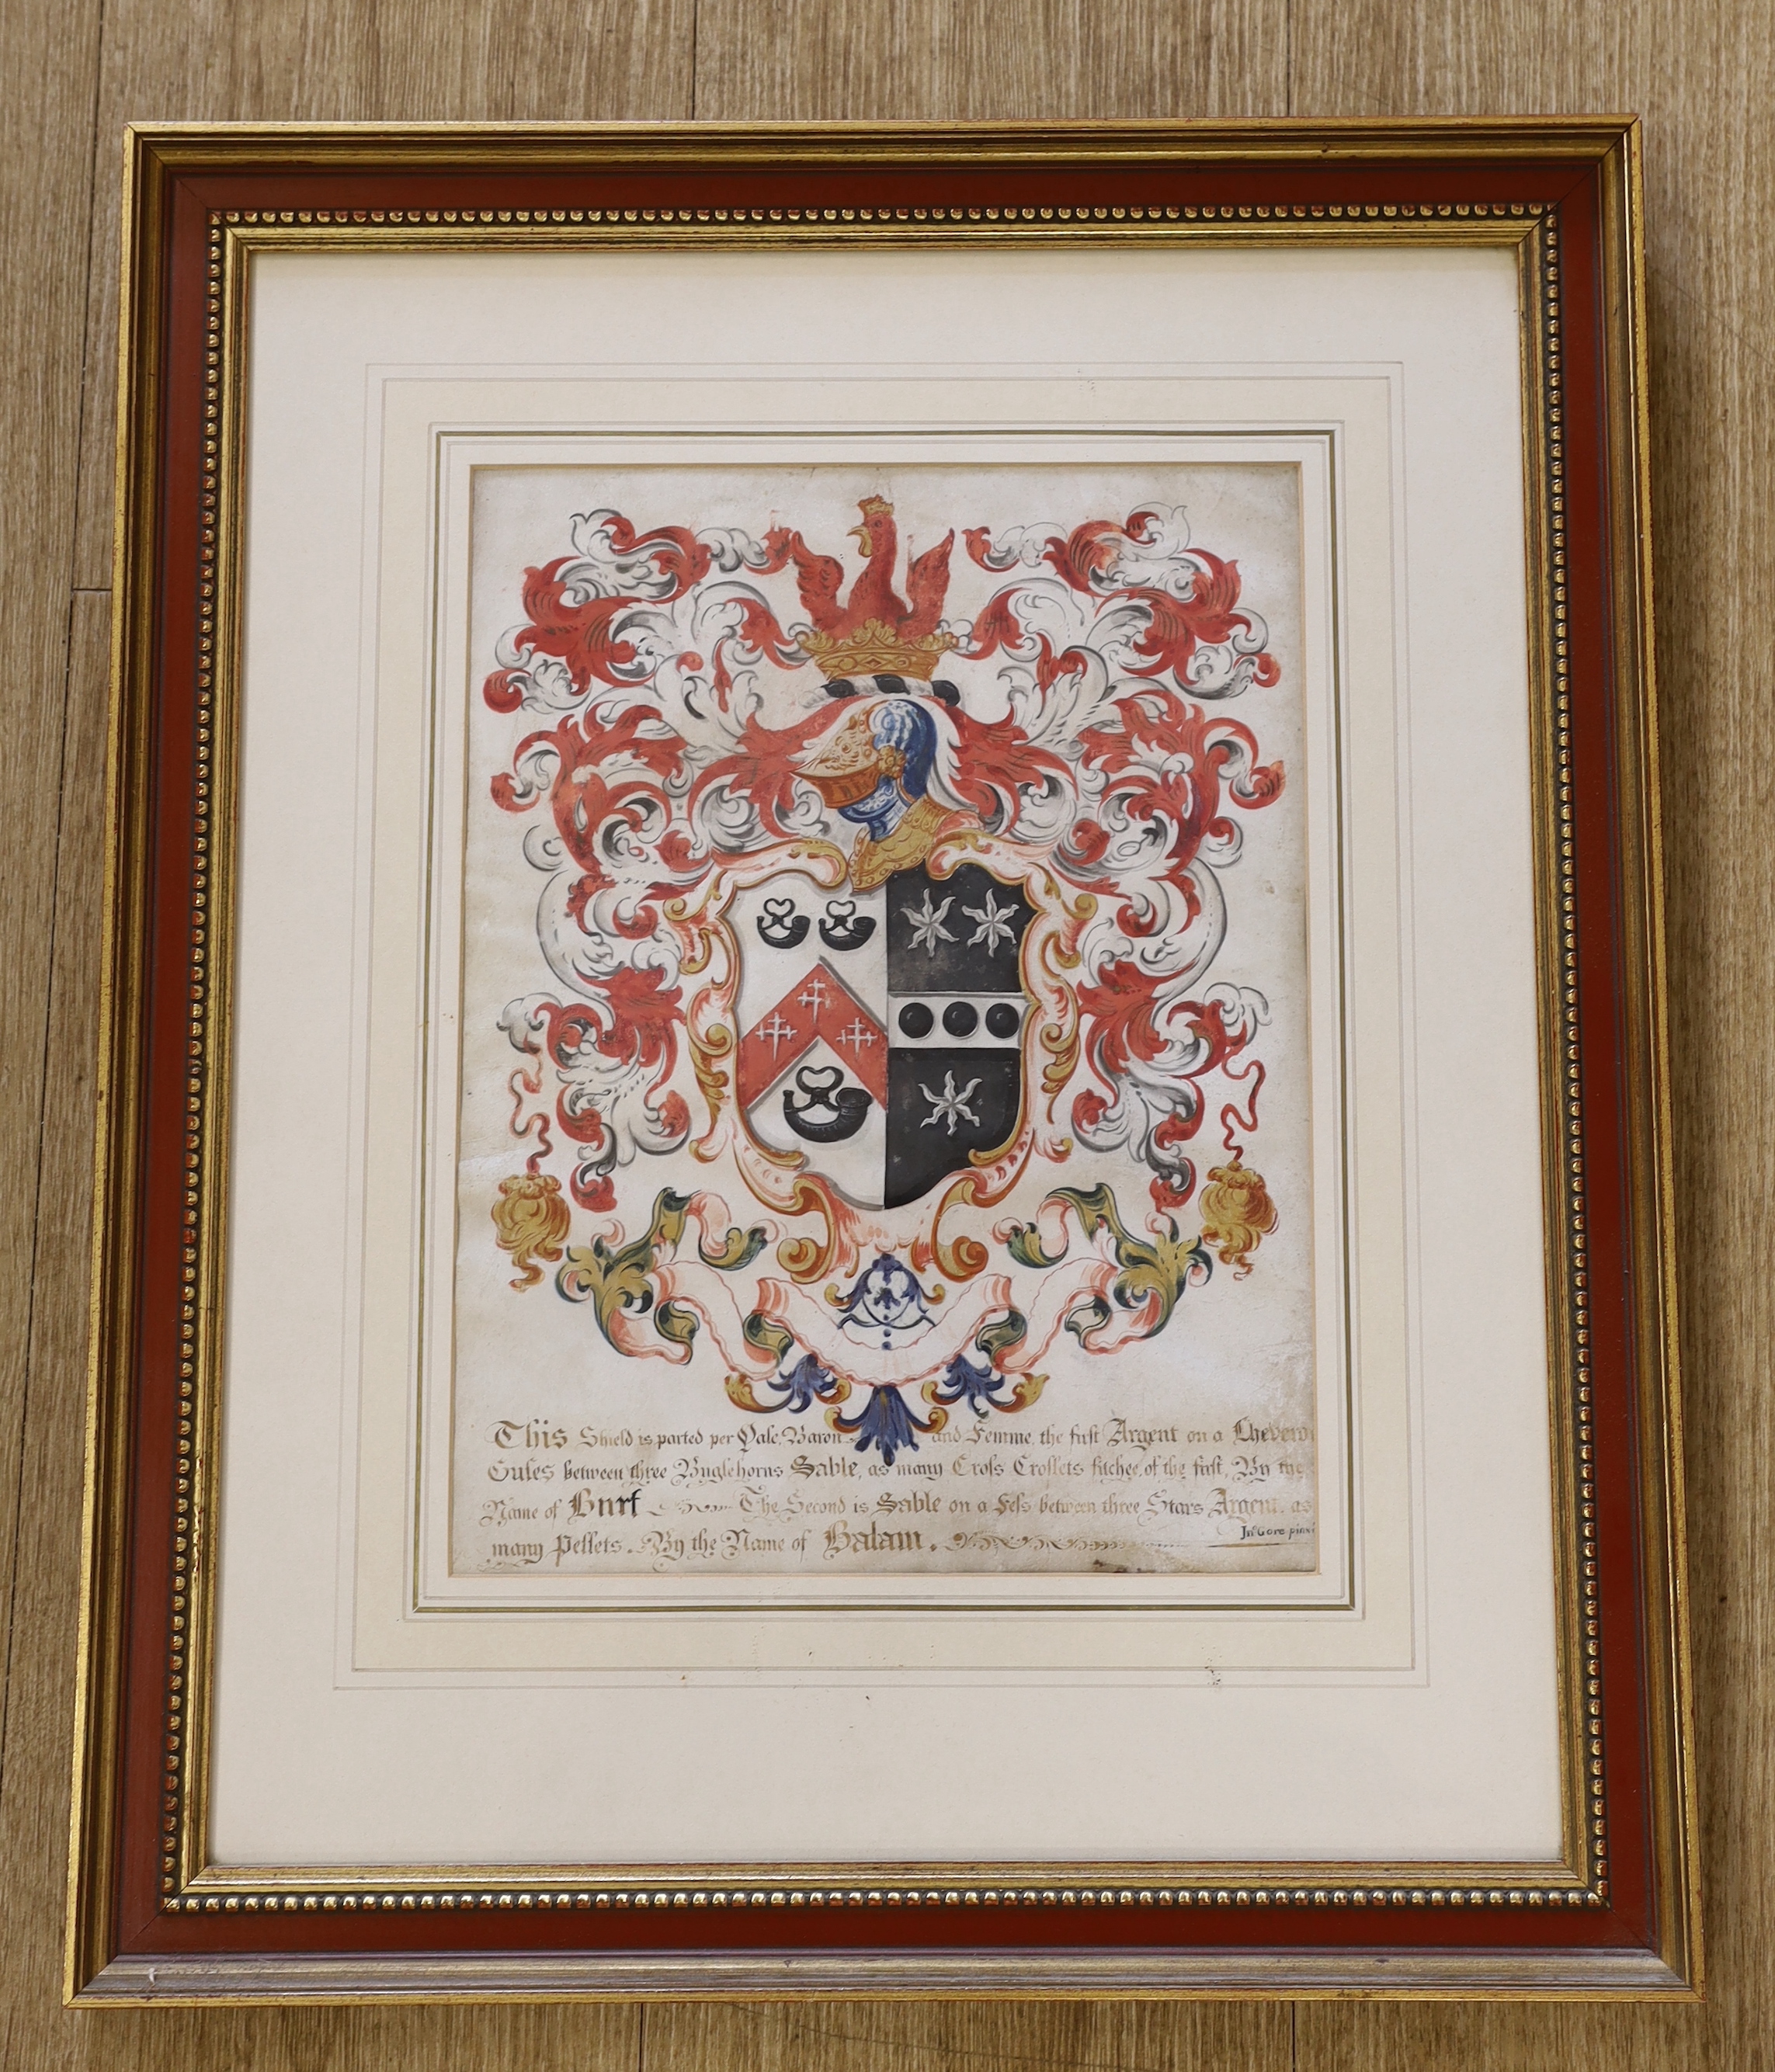 Jno. Gore (18th C.), illuminated parchment, Armorial for the Burt Family, signed, 32 x 24cm